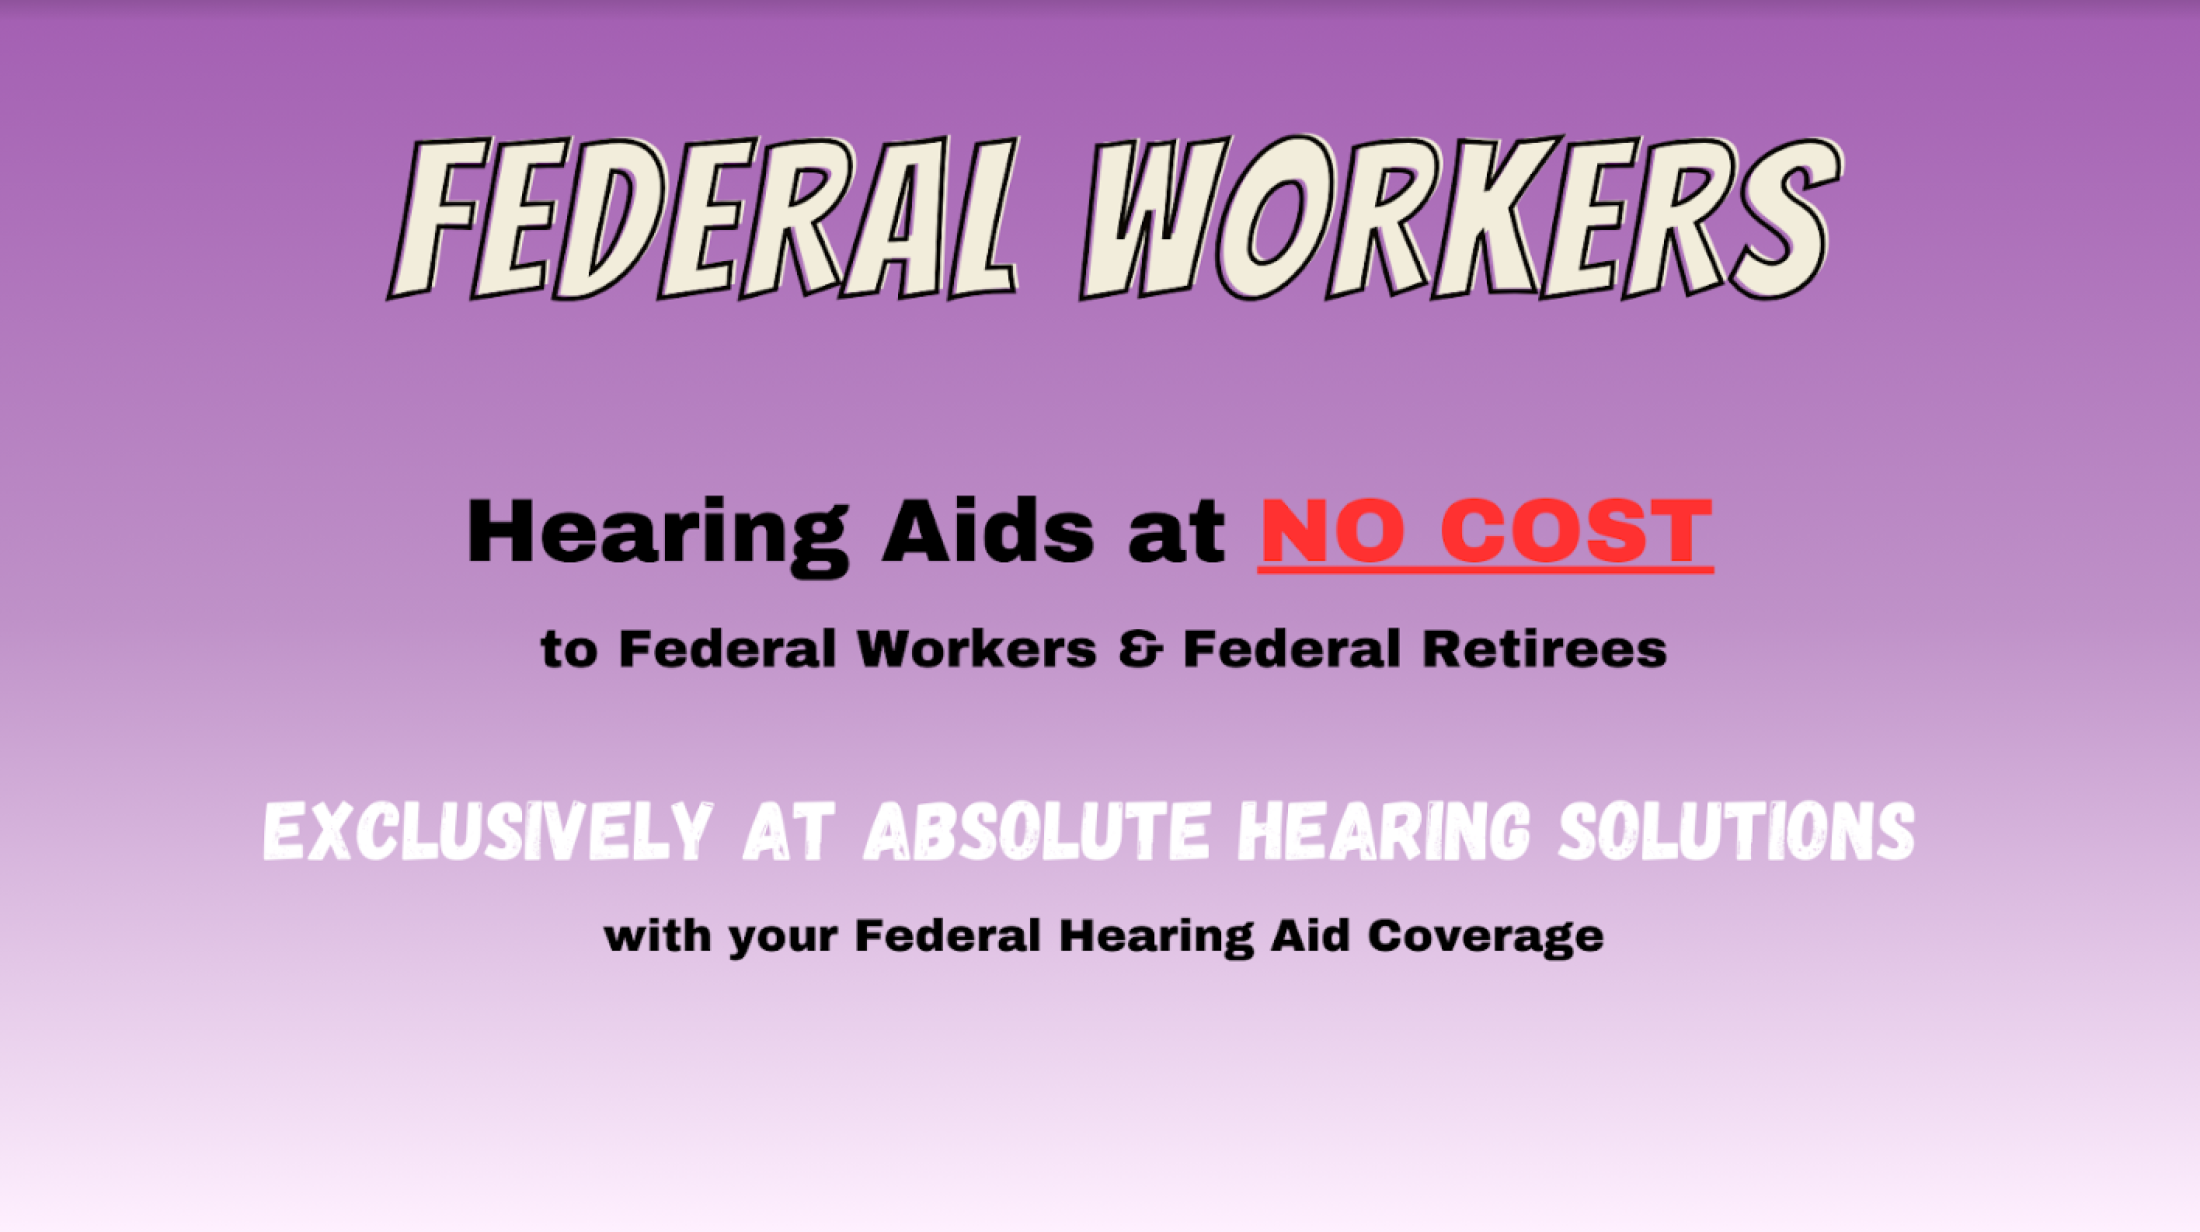 Federal Workers - Hearing Aids at No Cost